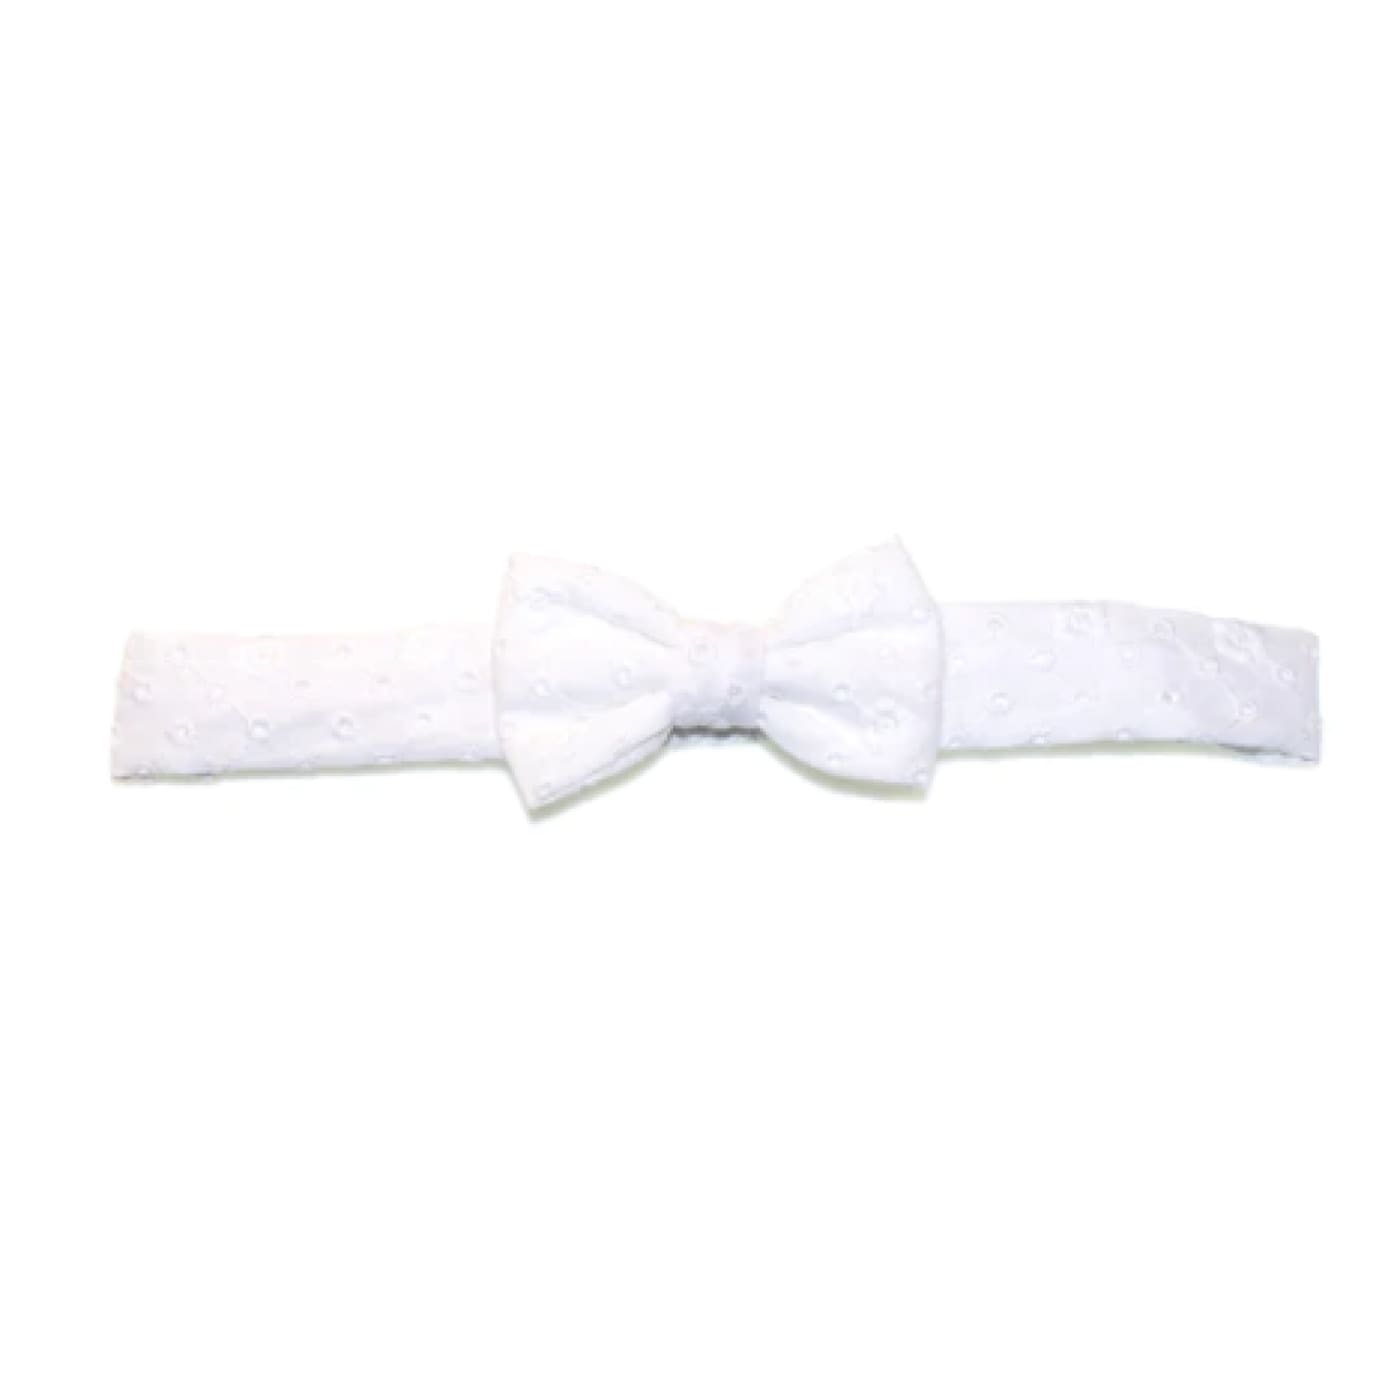 Goody Gumdrops Broderie Anglaise Baby Headband - White - White - BABY & TODDLER CLOTHING - HEADBANDS/HAIR CLIPS